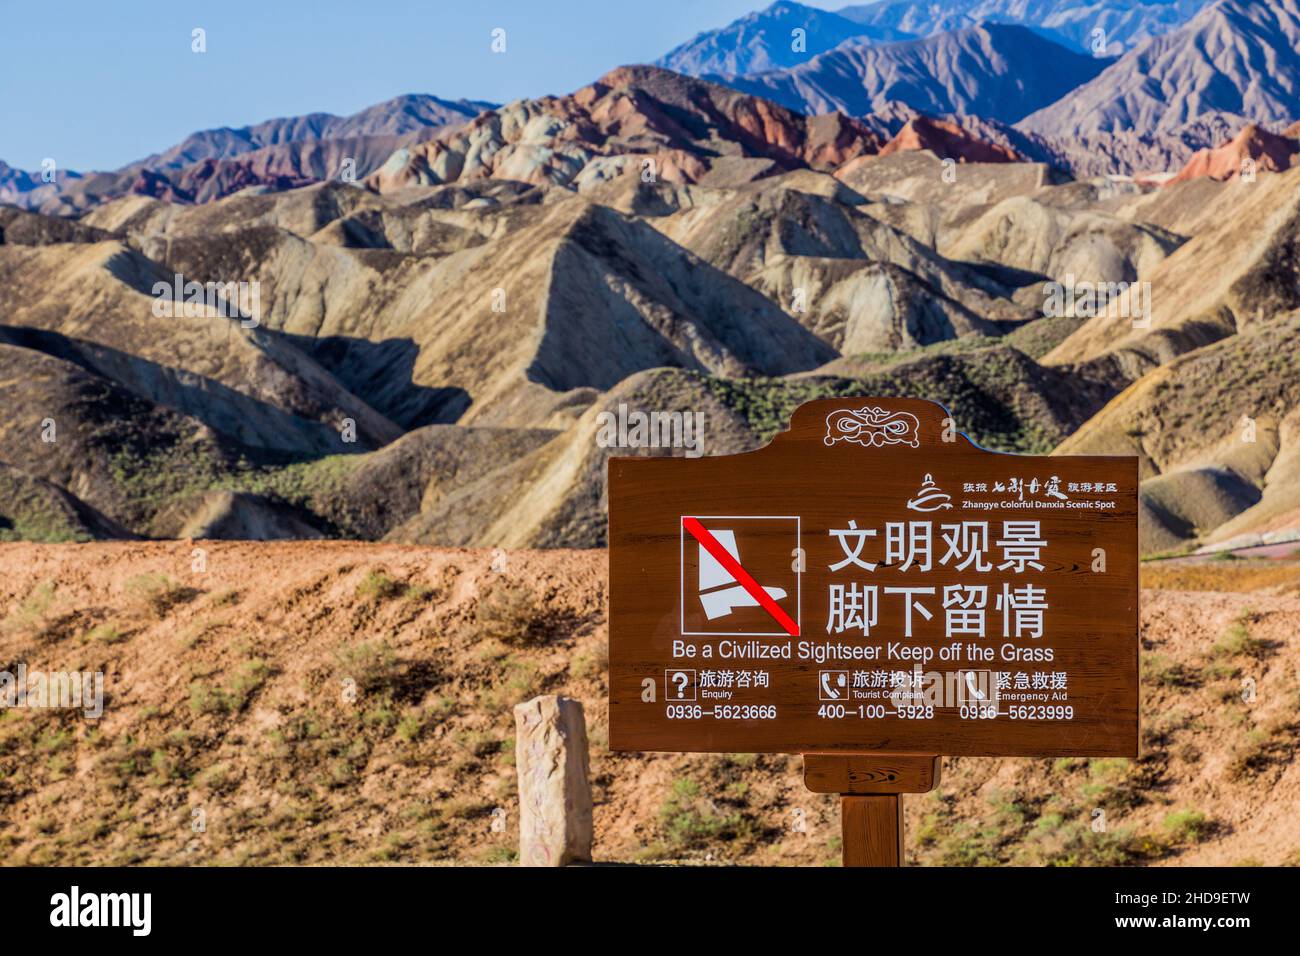 ZHANGYE, CHINA - AUGUST 23, 2018: Sign Be A Civilized Sightseer Keep off the Grass in Zhangye Danxia National Geopark, Gansu Province, China Stock Photo